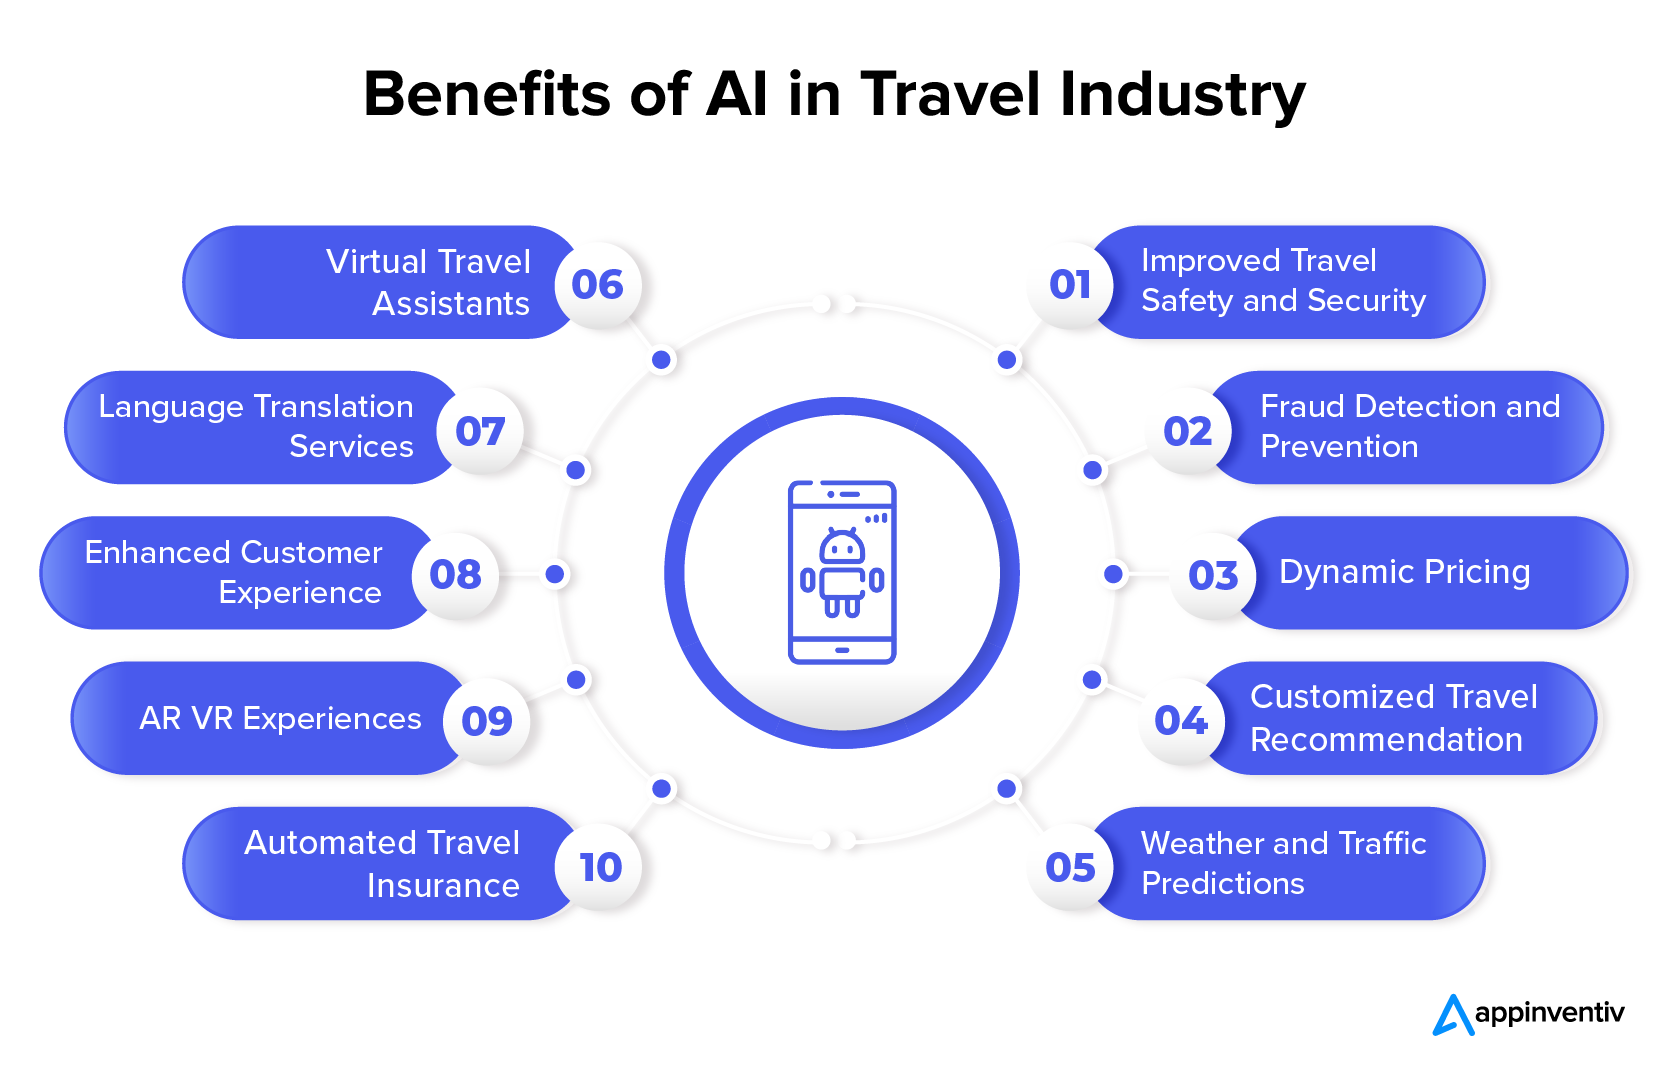 Benefits of AI in Travel Industry